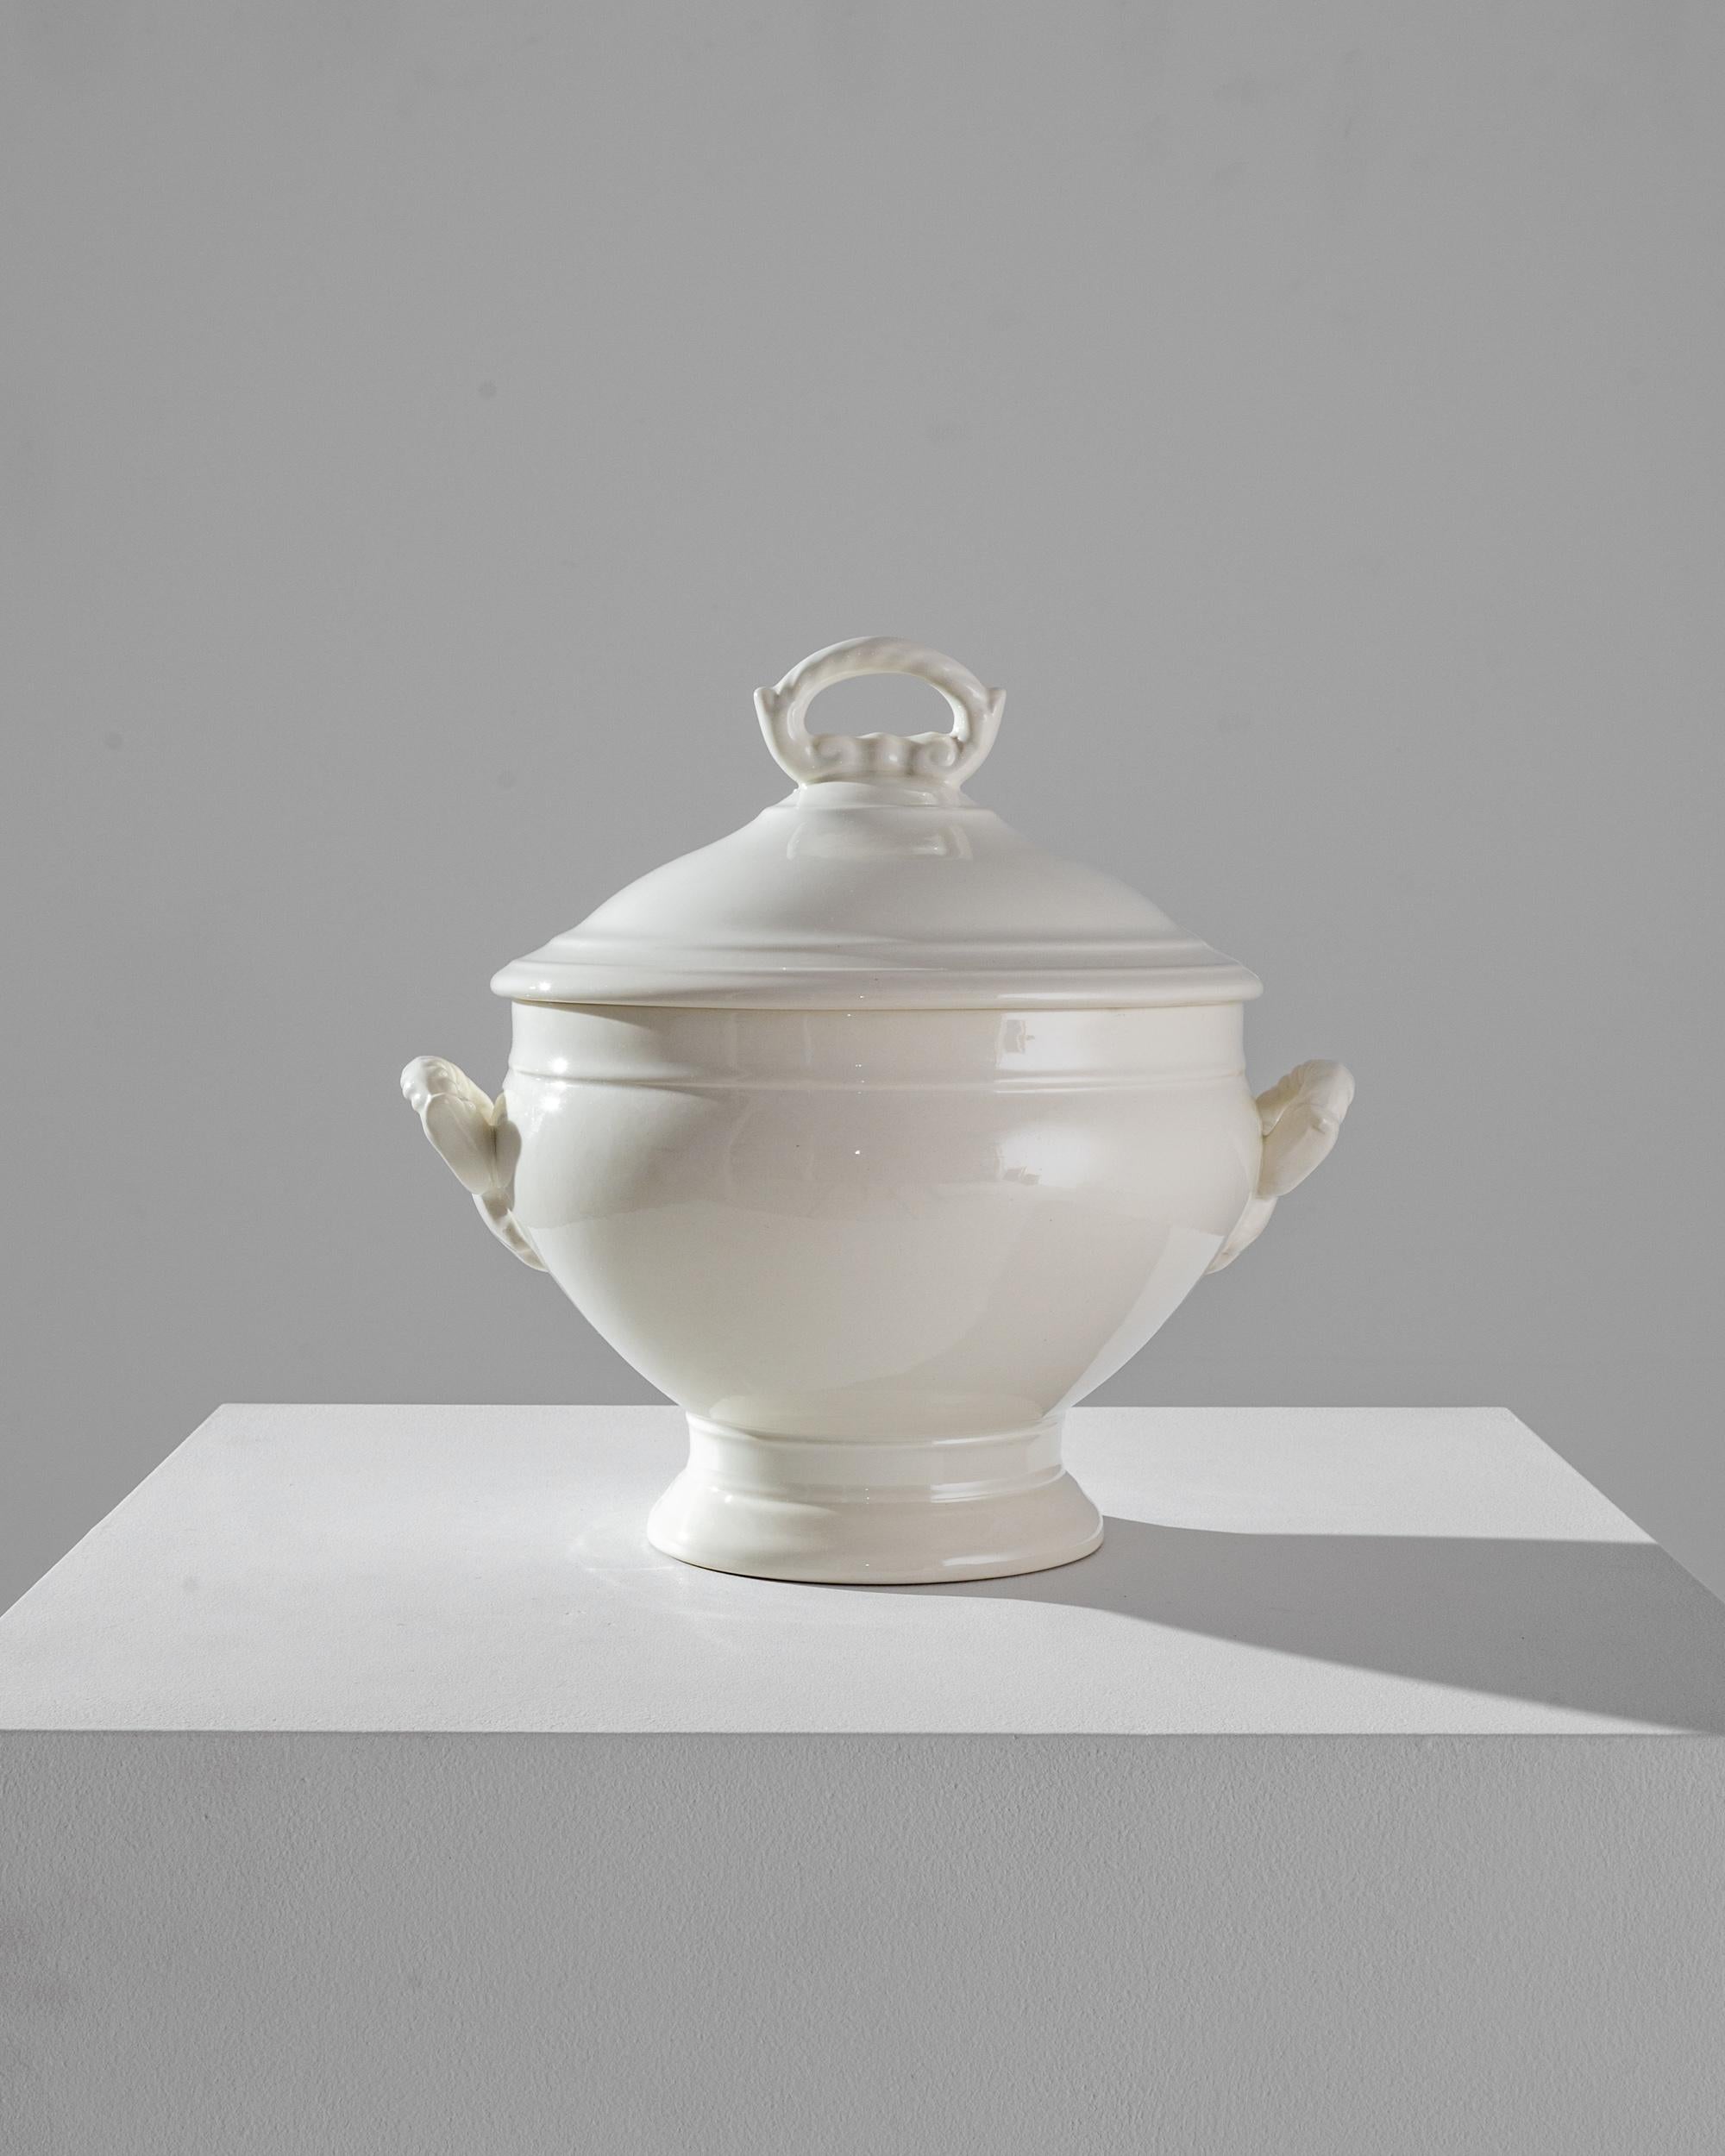 Exquisitely crafted in Belgium at the beginning of the 20th century, this porcelain vessel is especially proportioned for the delivery of liquid courses. As a serving vessel the piece is composed with the requisite pomp, outfitting will all the